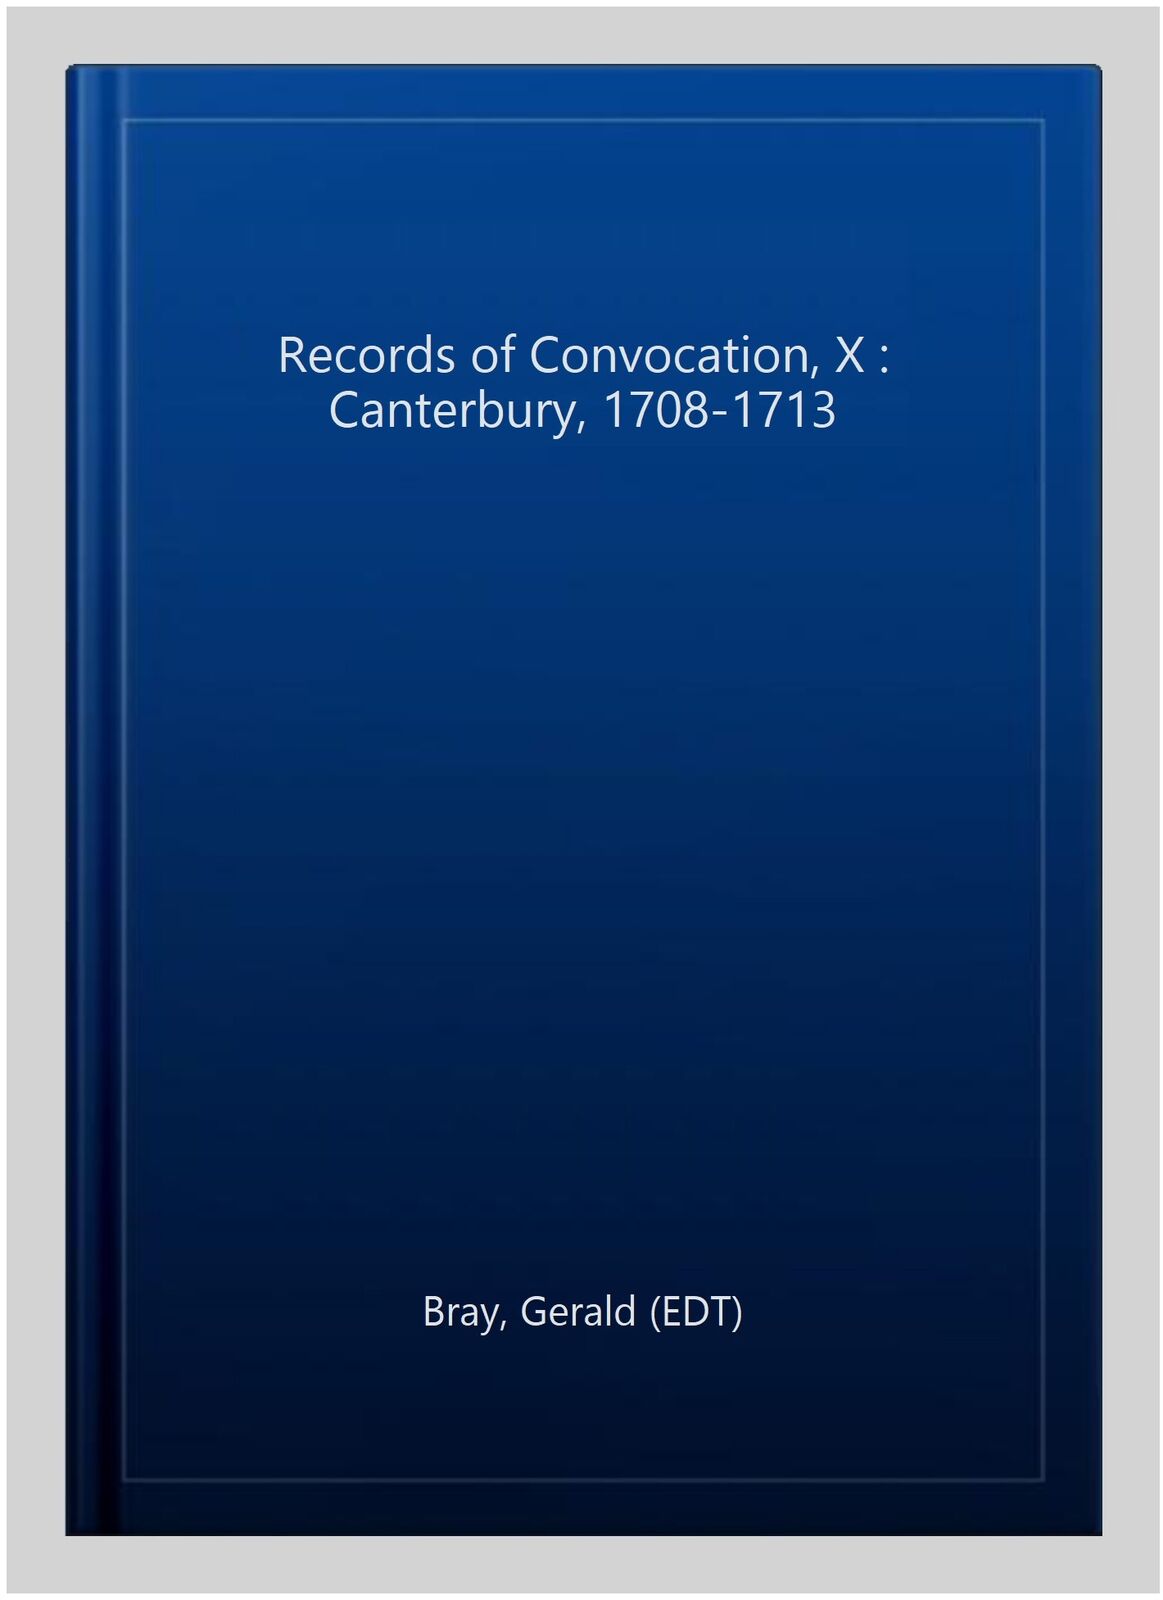 Records of Convocation XI: Canterbury, 1714-1760 (Records of Convocation, 11) (Volume 11)